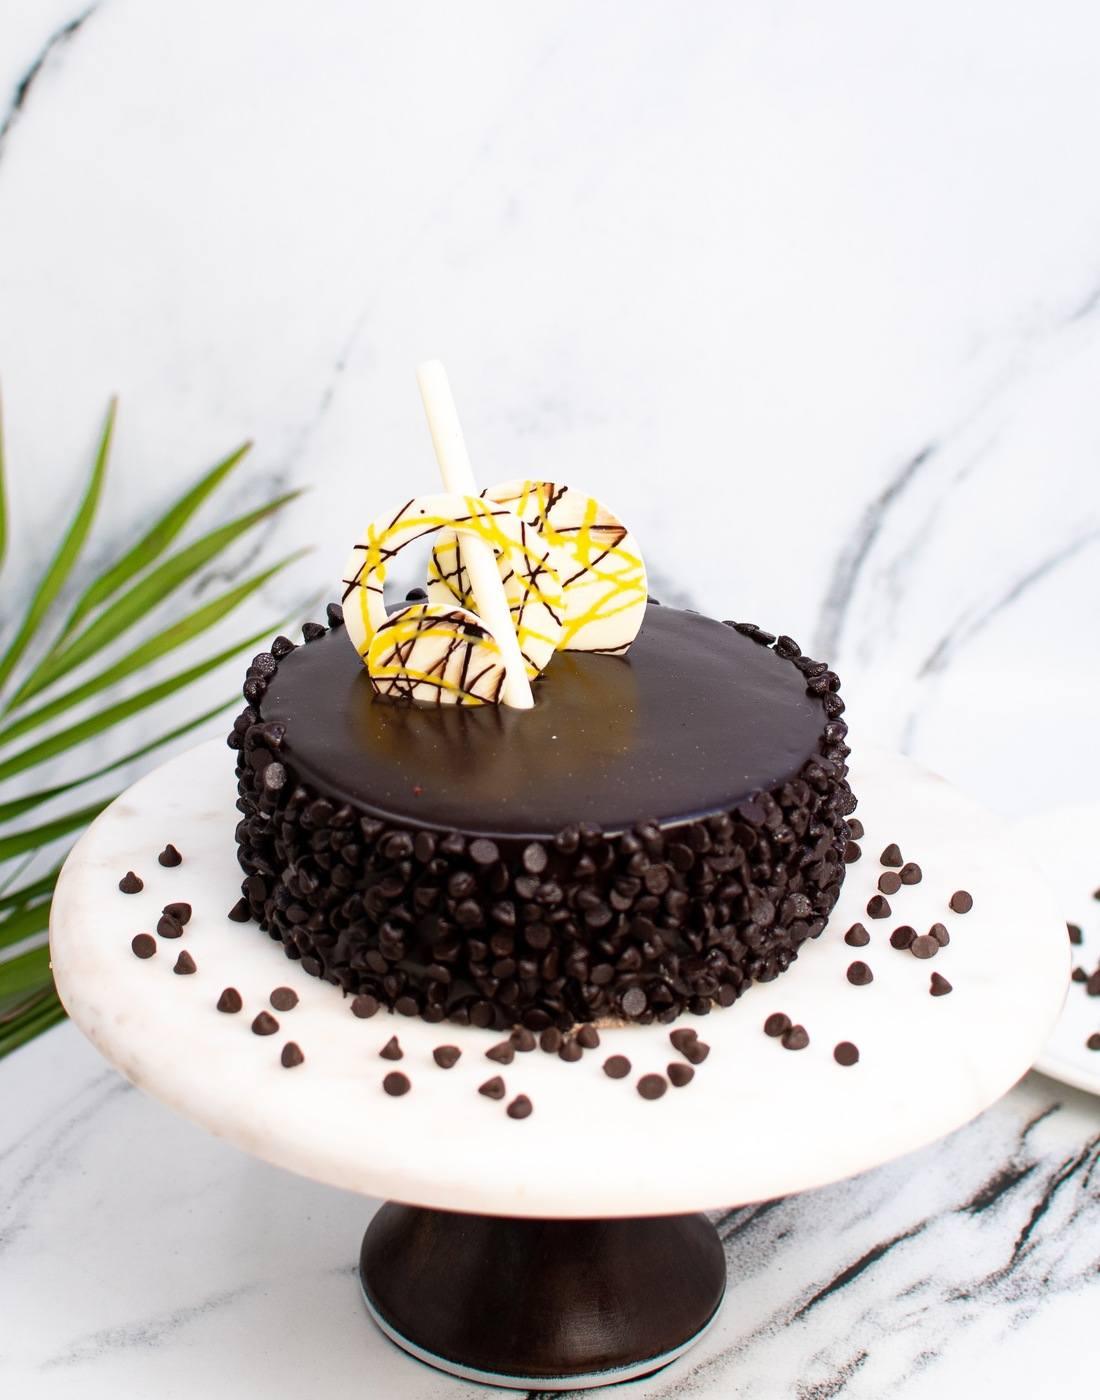 Chocolate Chips Cake, Cake Delivey in Gurgaon, Noida and Greater Noida